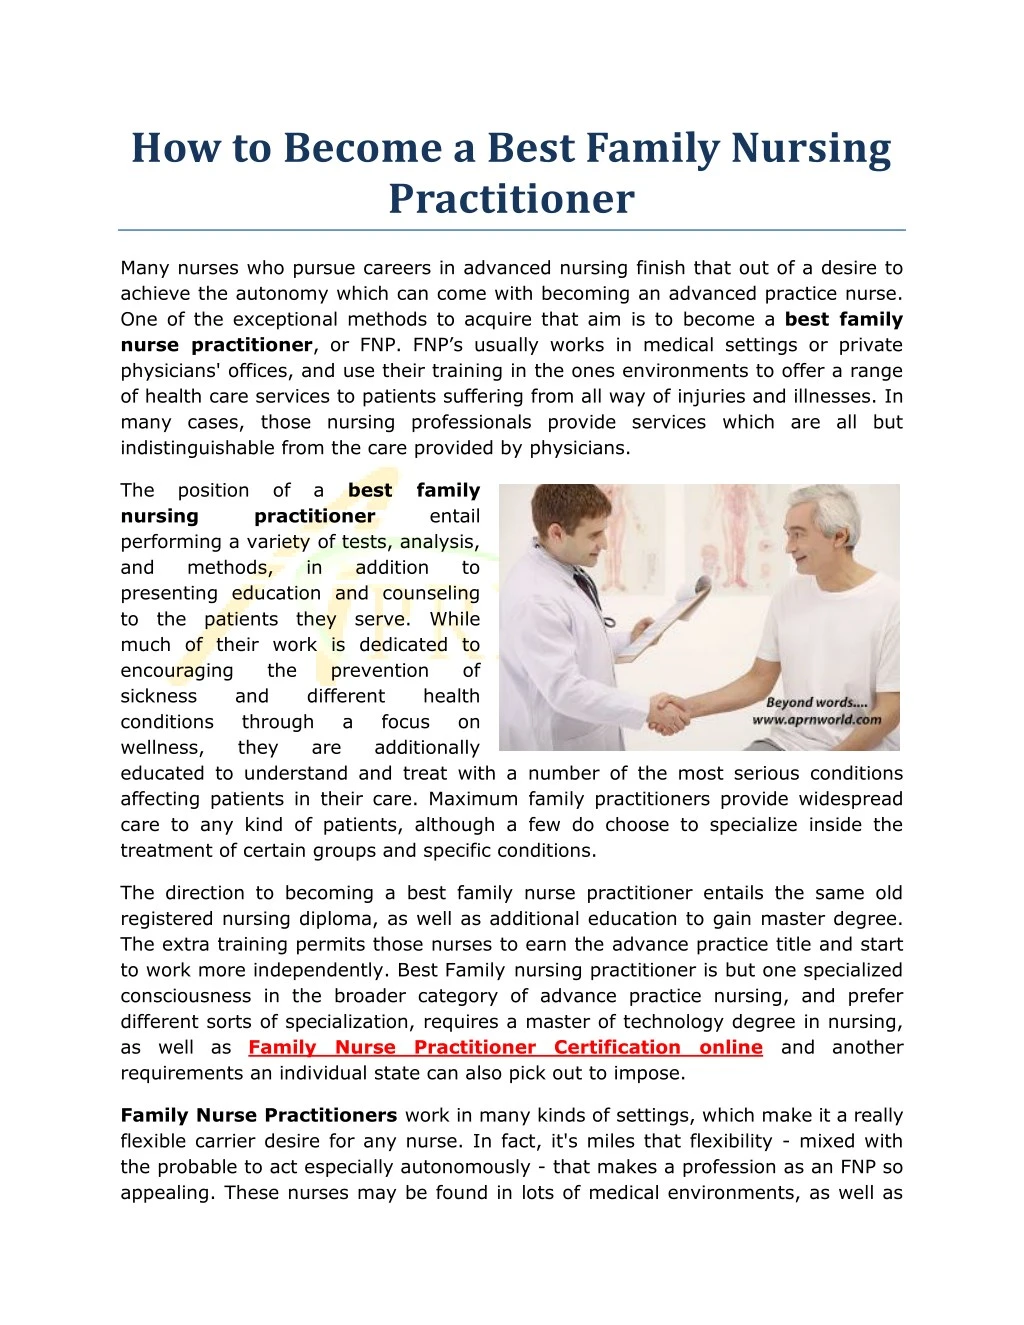 how to become a best family nursing practitioner